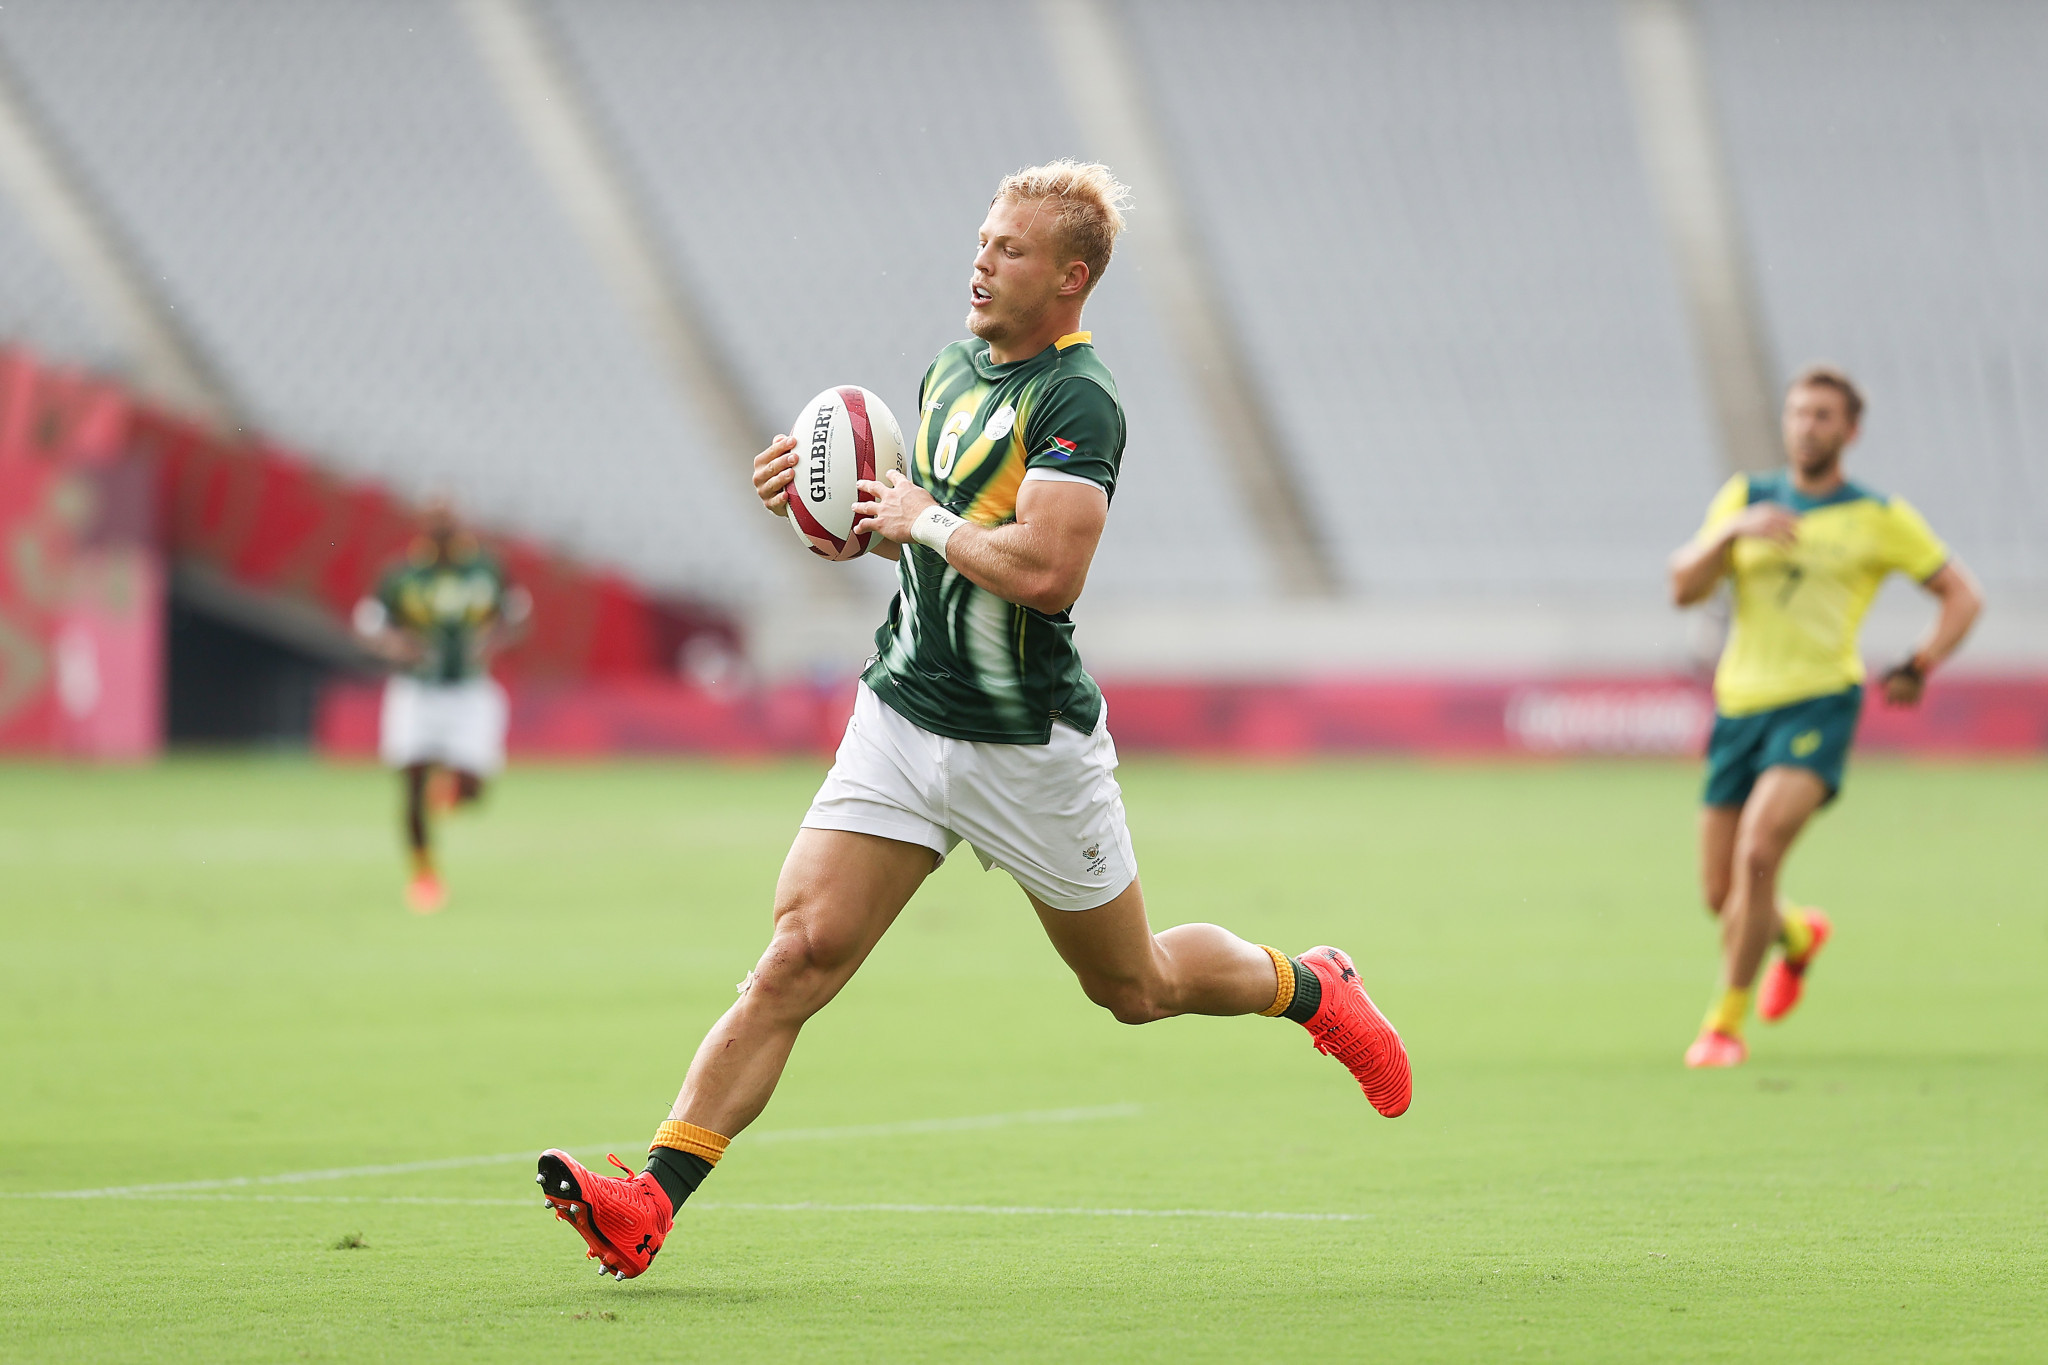 South Africa and Australia triumph in World Rugby Sevens Series opener in Dubai